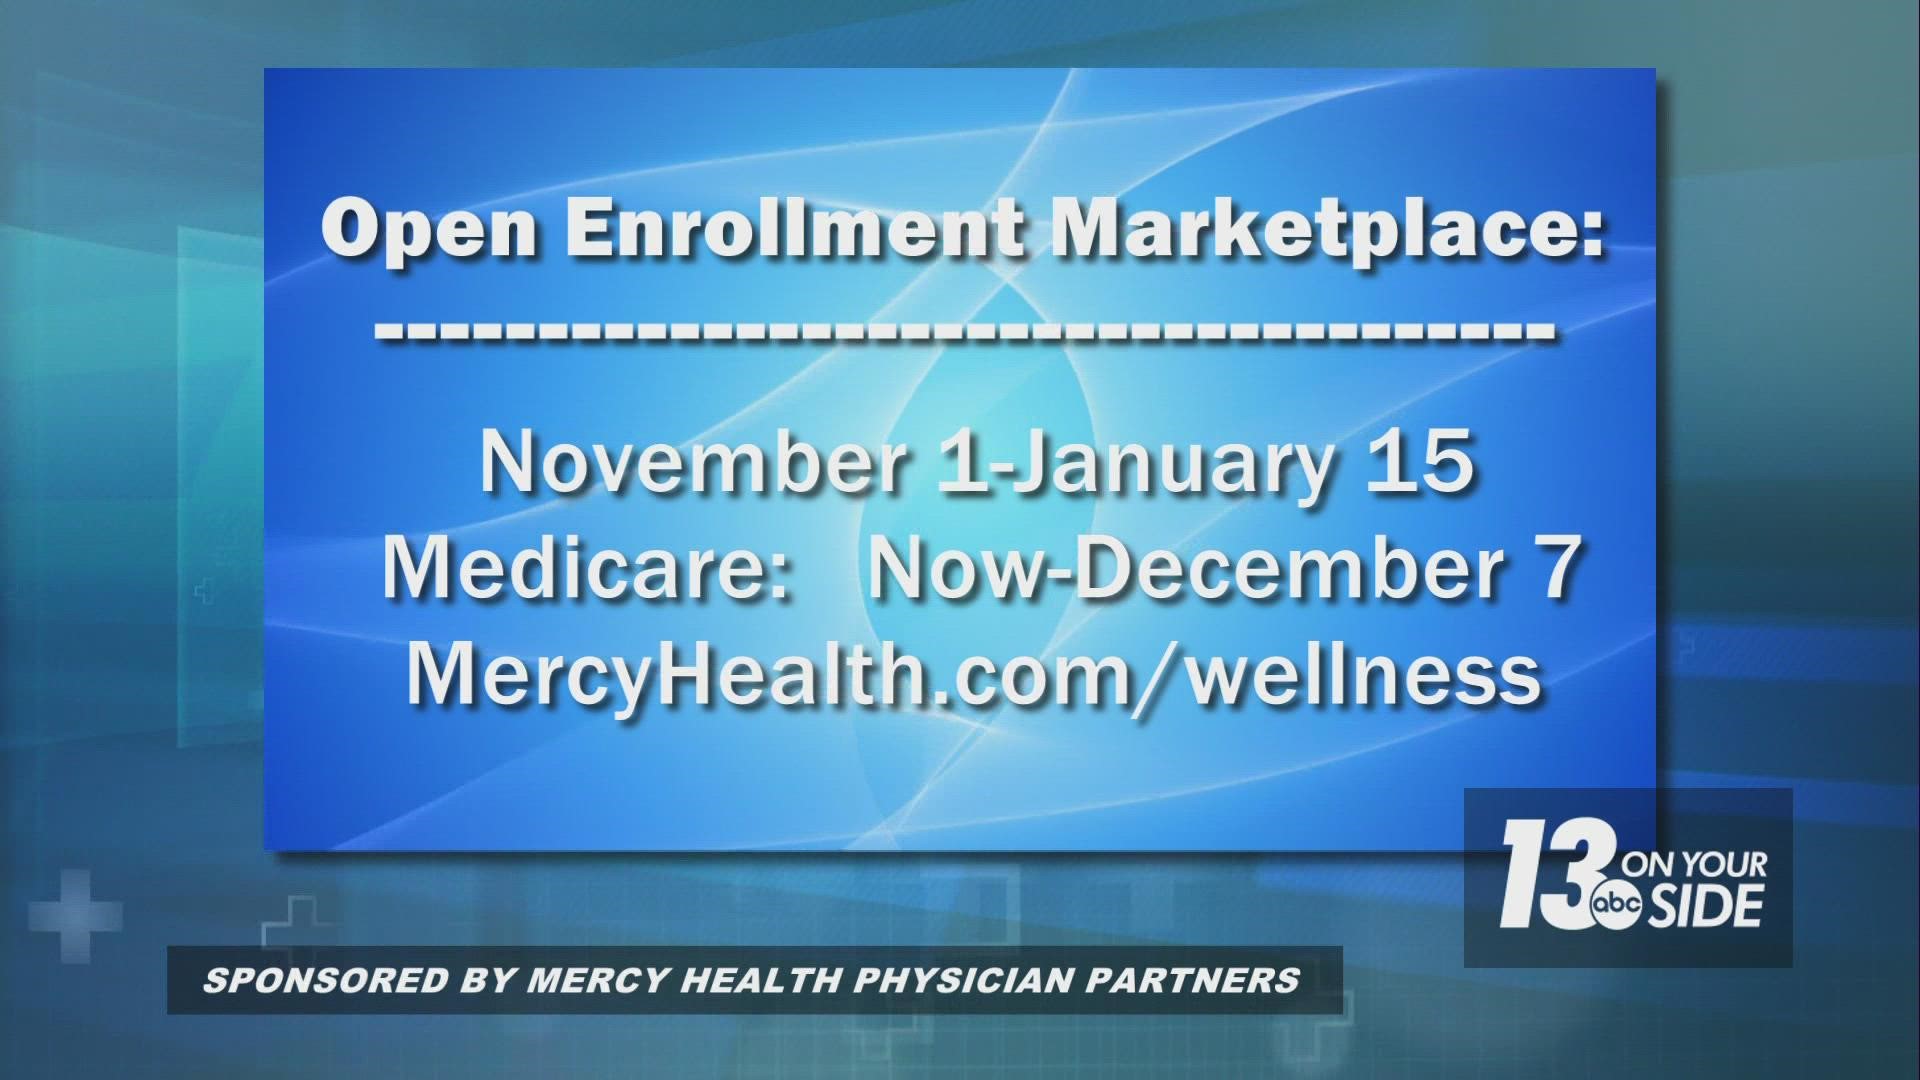 Open Enrollment is the often-confusing process of selecting health care insurance coverage for the following year.